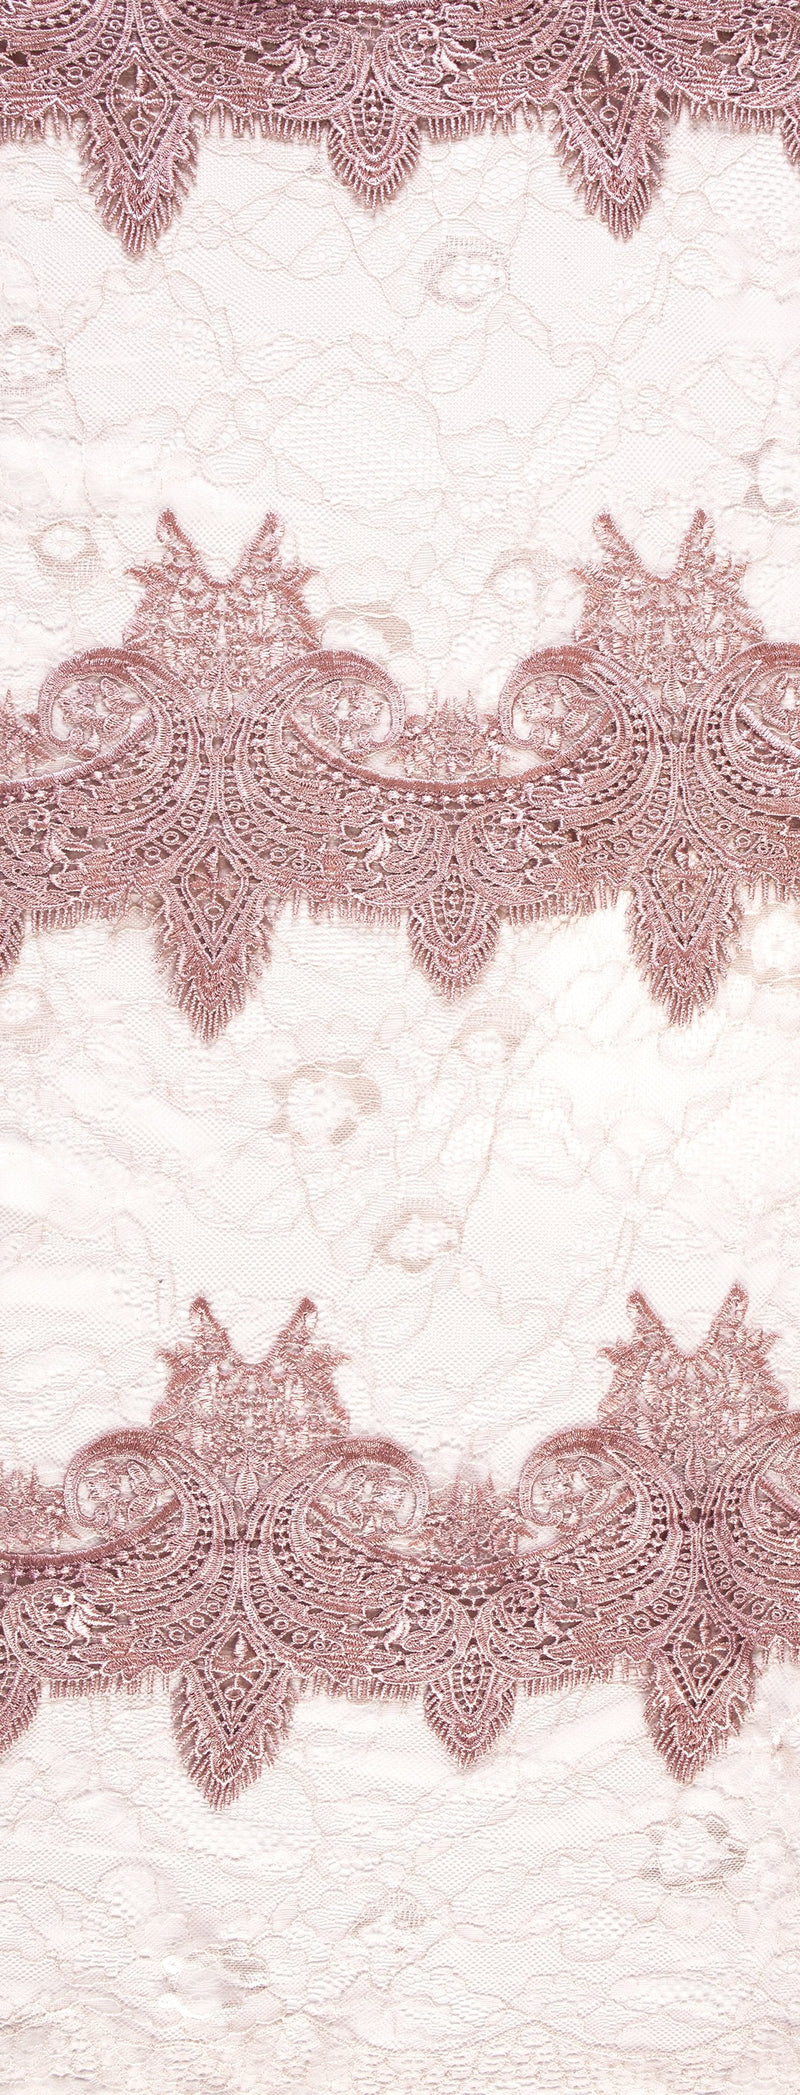 Powder Double Layer Lace Guipure Embroidery Fabric | Burç Fabric